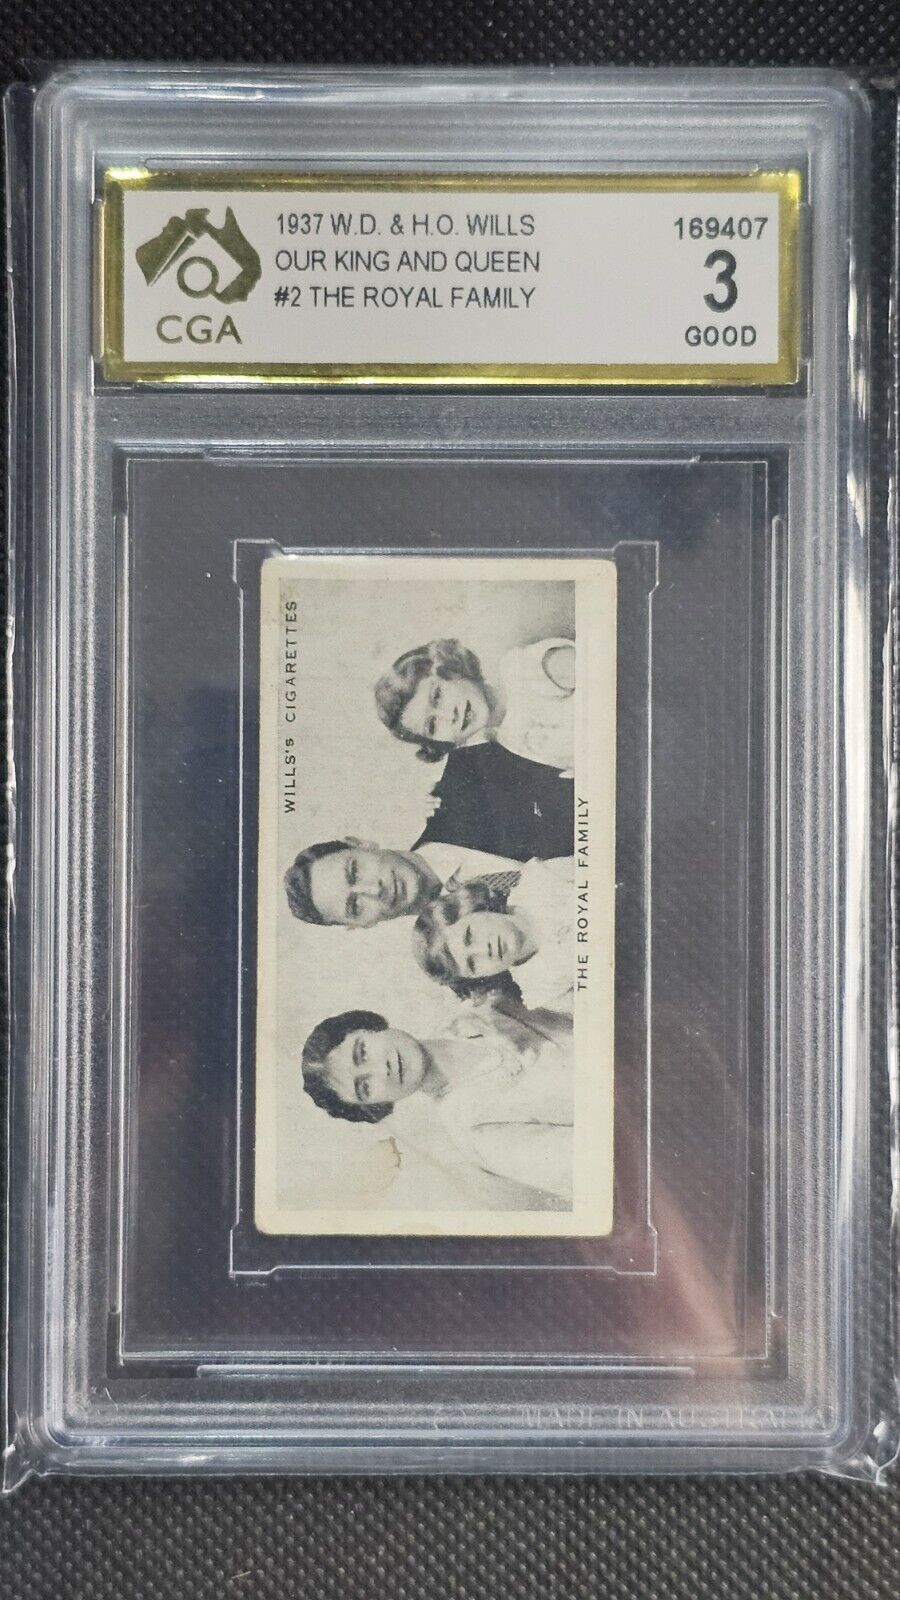 1937 W. O & H. O Wills Our King And Queen #2 Royal Family Graded CGA 3 Rare